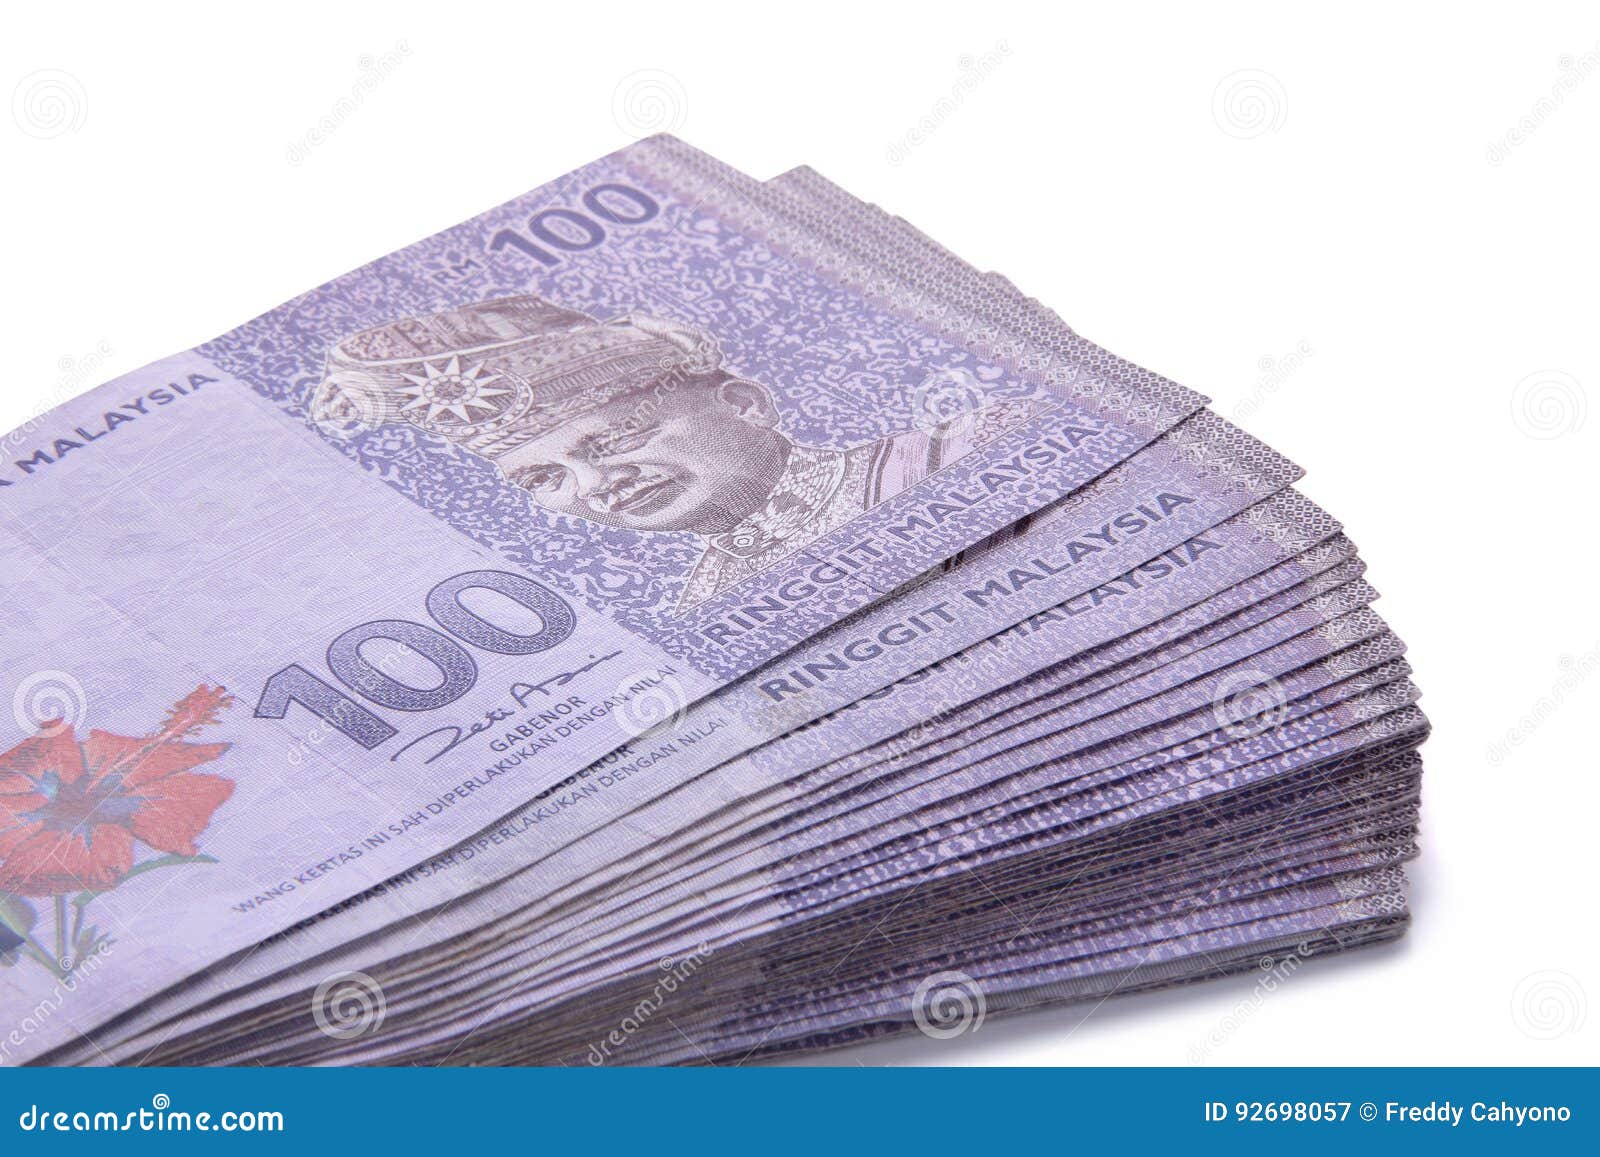 ringgit money of hundred stacked